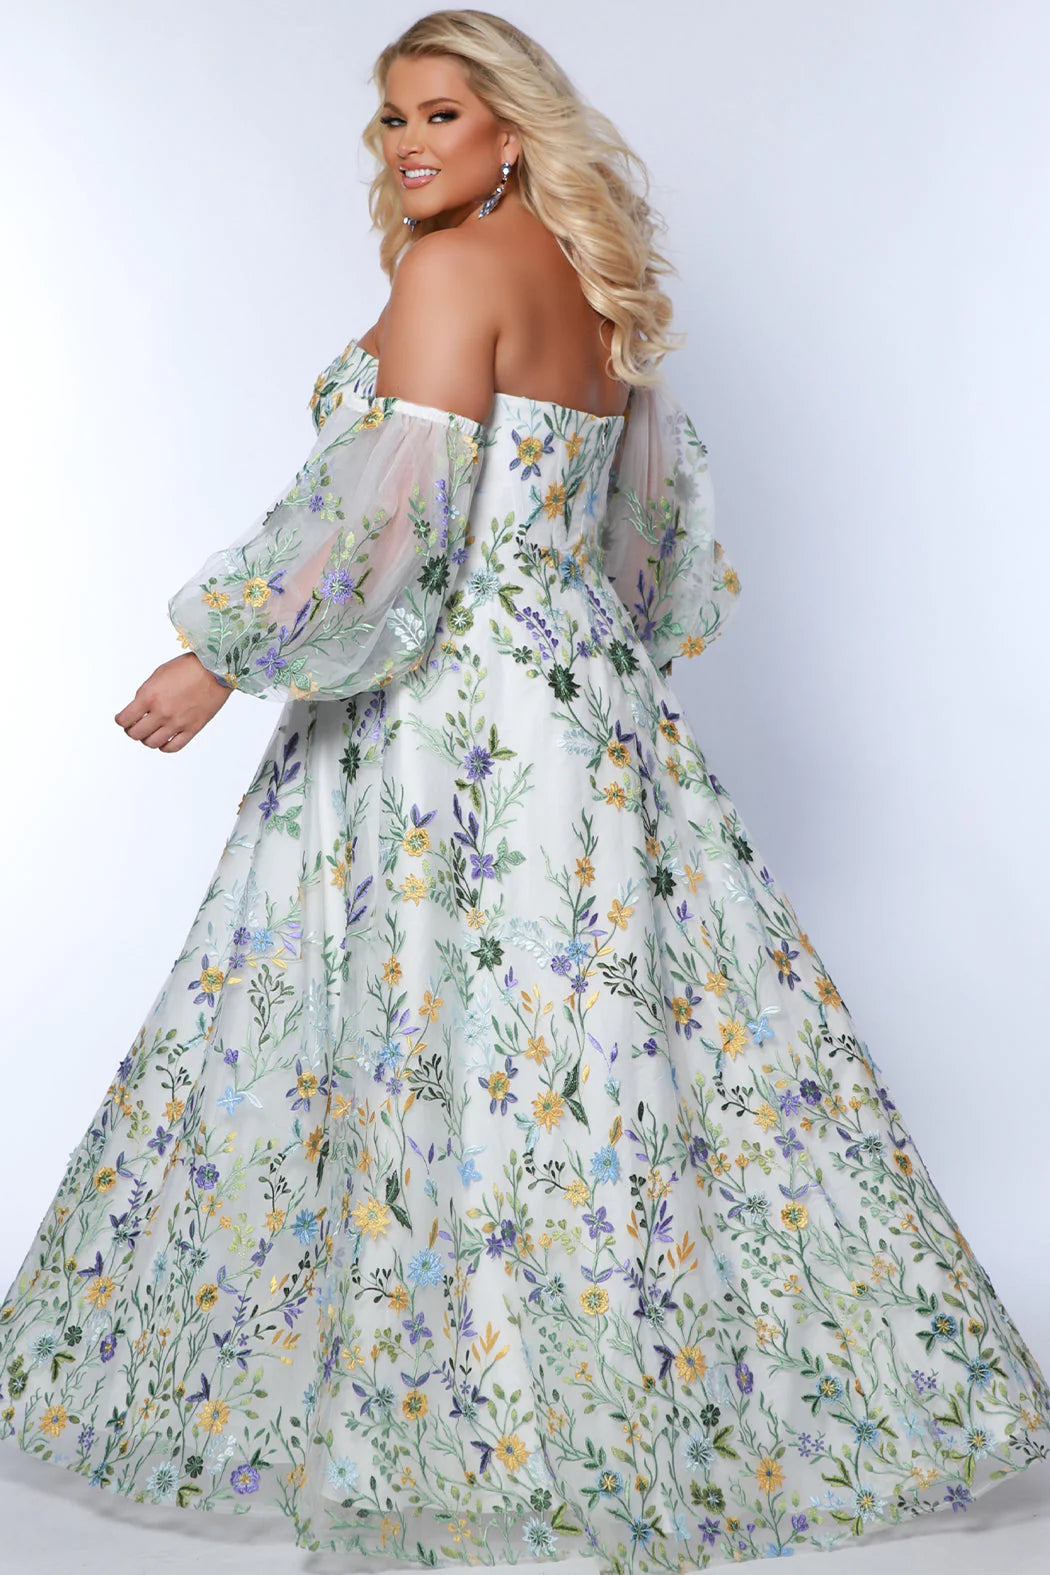 This Sydneys Closet SC7381 long prom dress is perfect for formal occasions or special evenings out. Featuring a plus size A-line silhouette, a sweetheart neckline, and a striking floral pattern, this stylish dress is sure to bring a touch of elegance and glamour to your look. Unleash your romantic side in our 'Watch Me Bloom' formal dress! 